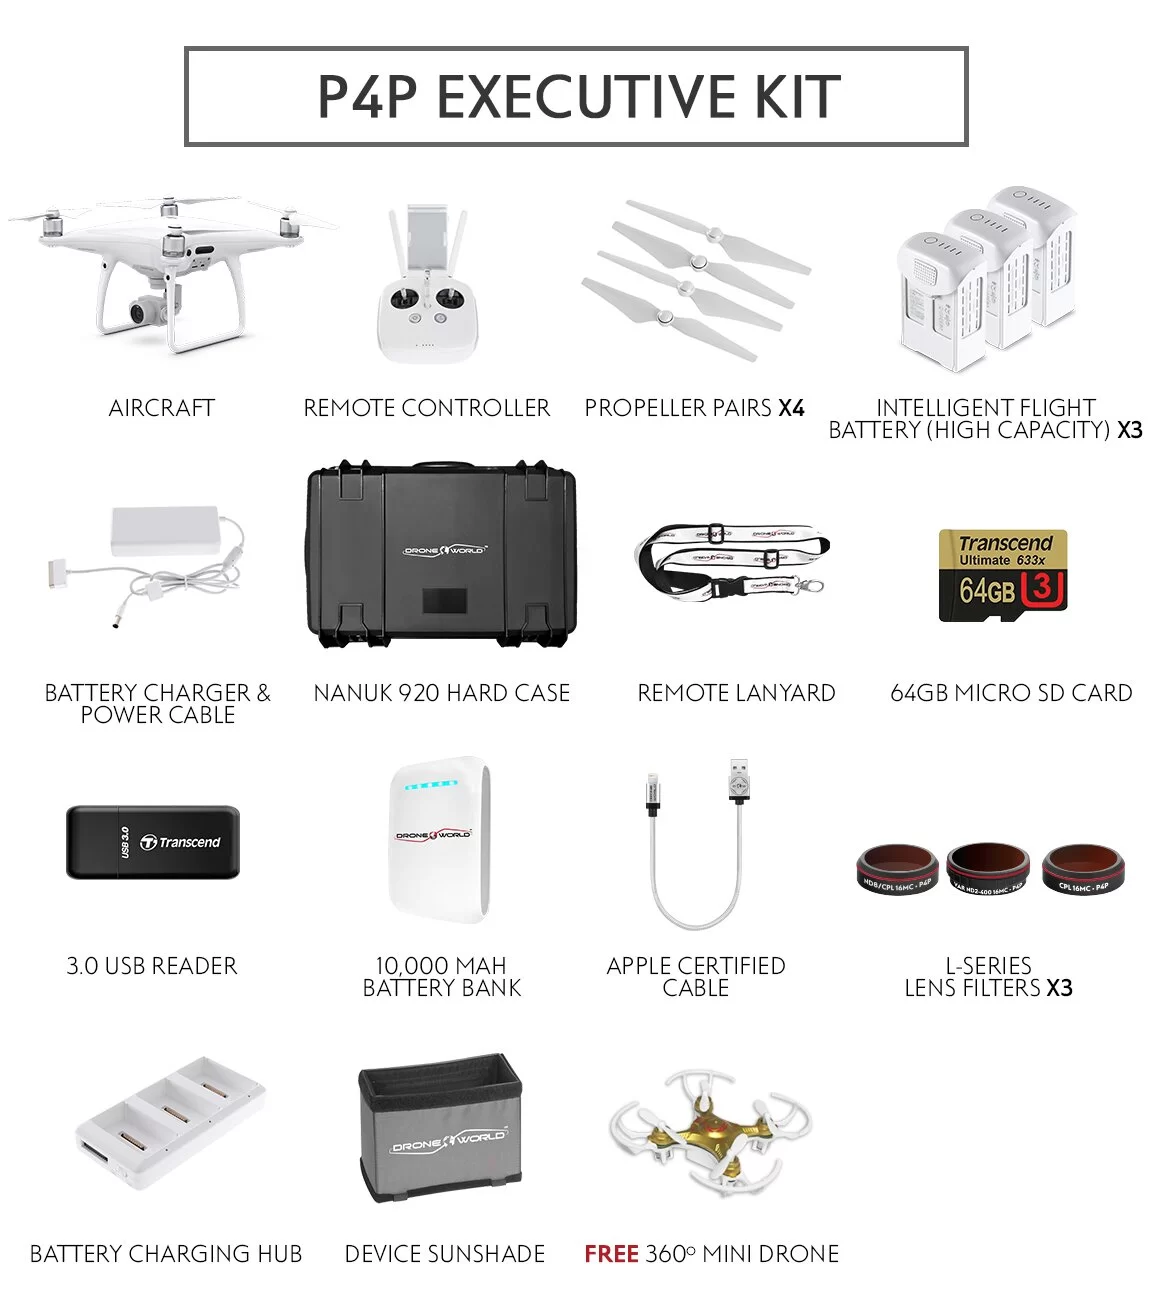 Phantom 4 PRO Executive Kit - What's included / what in the box